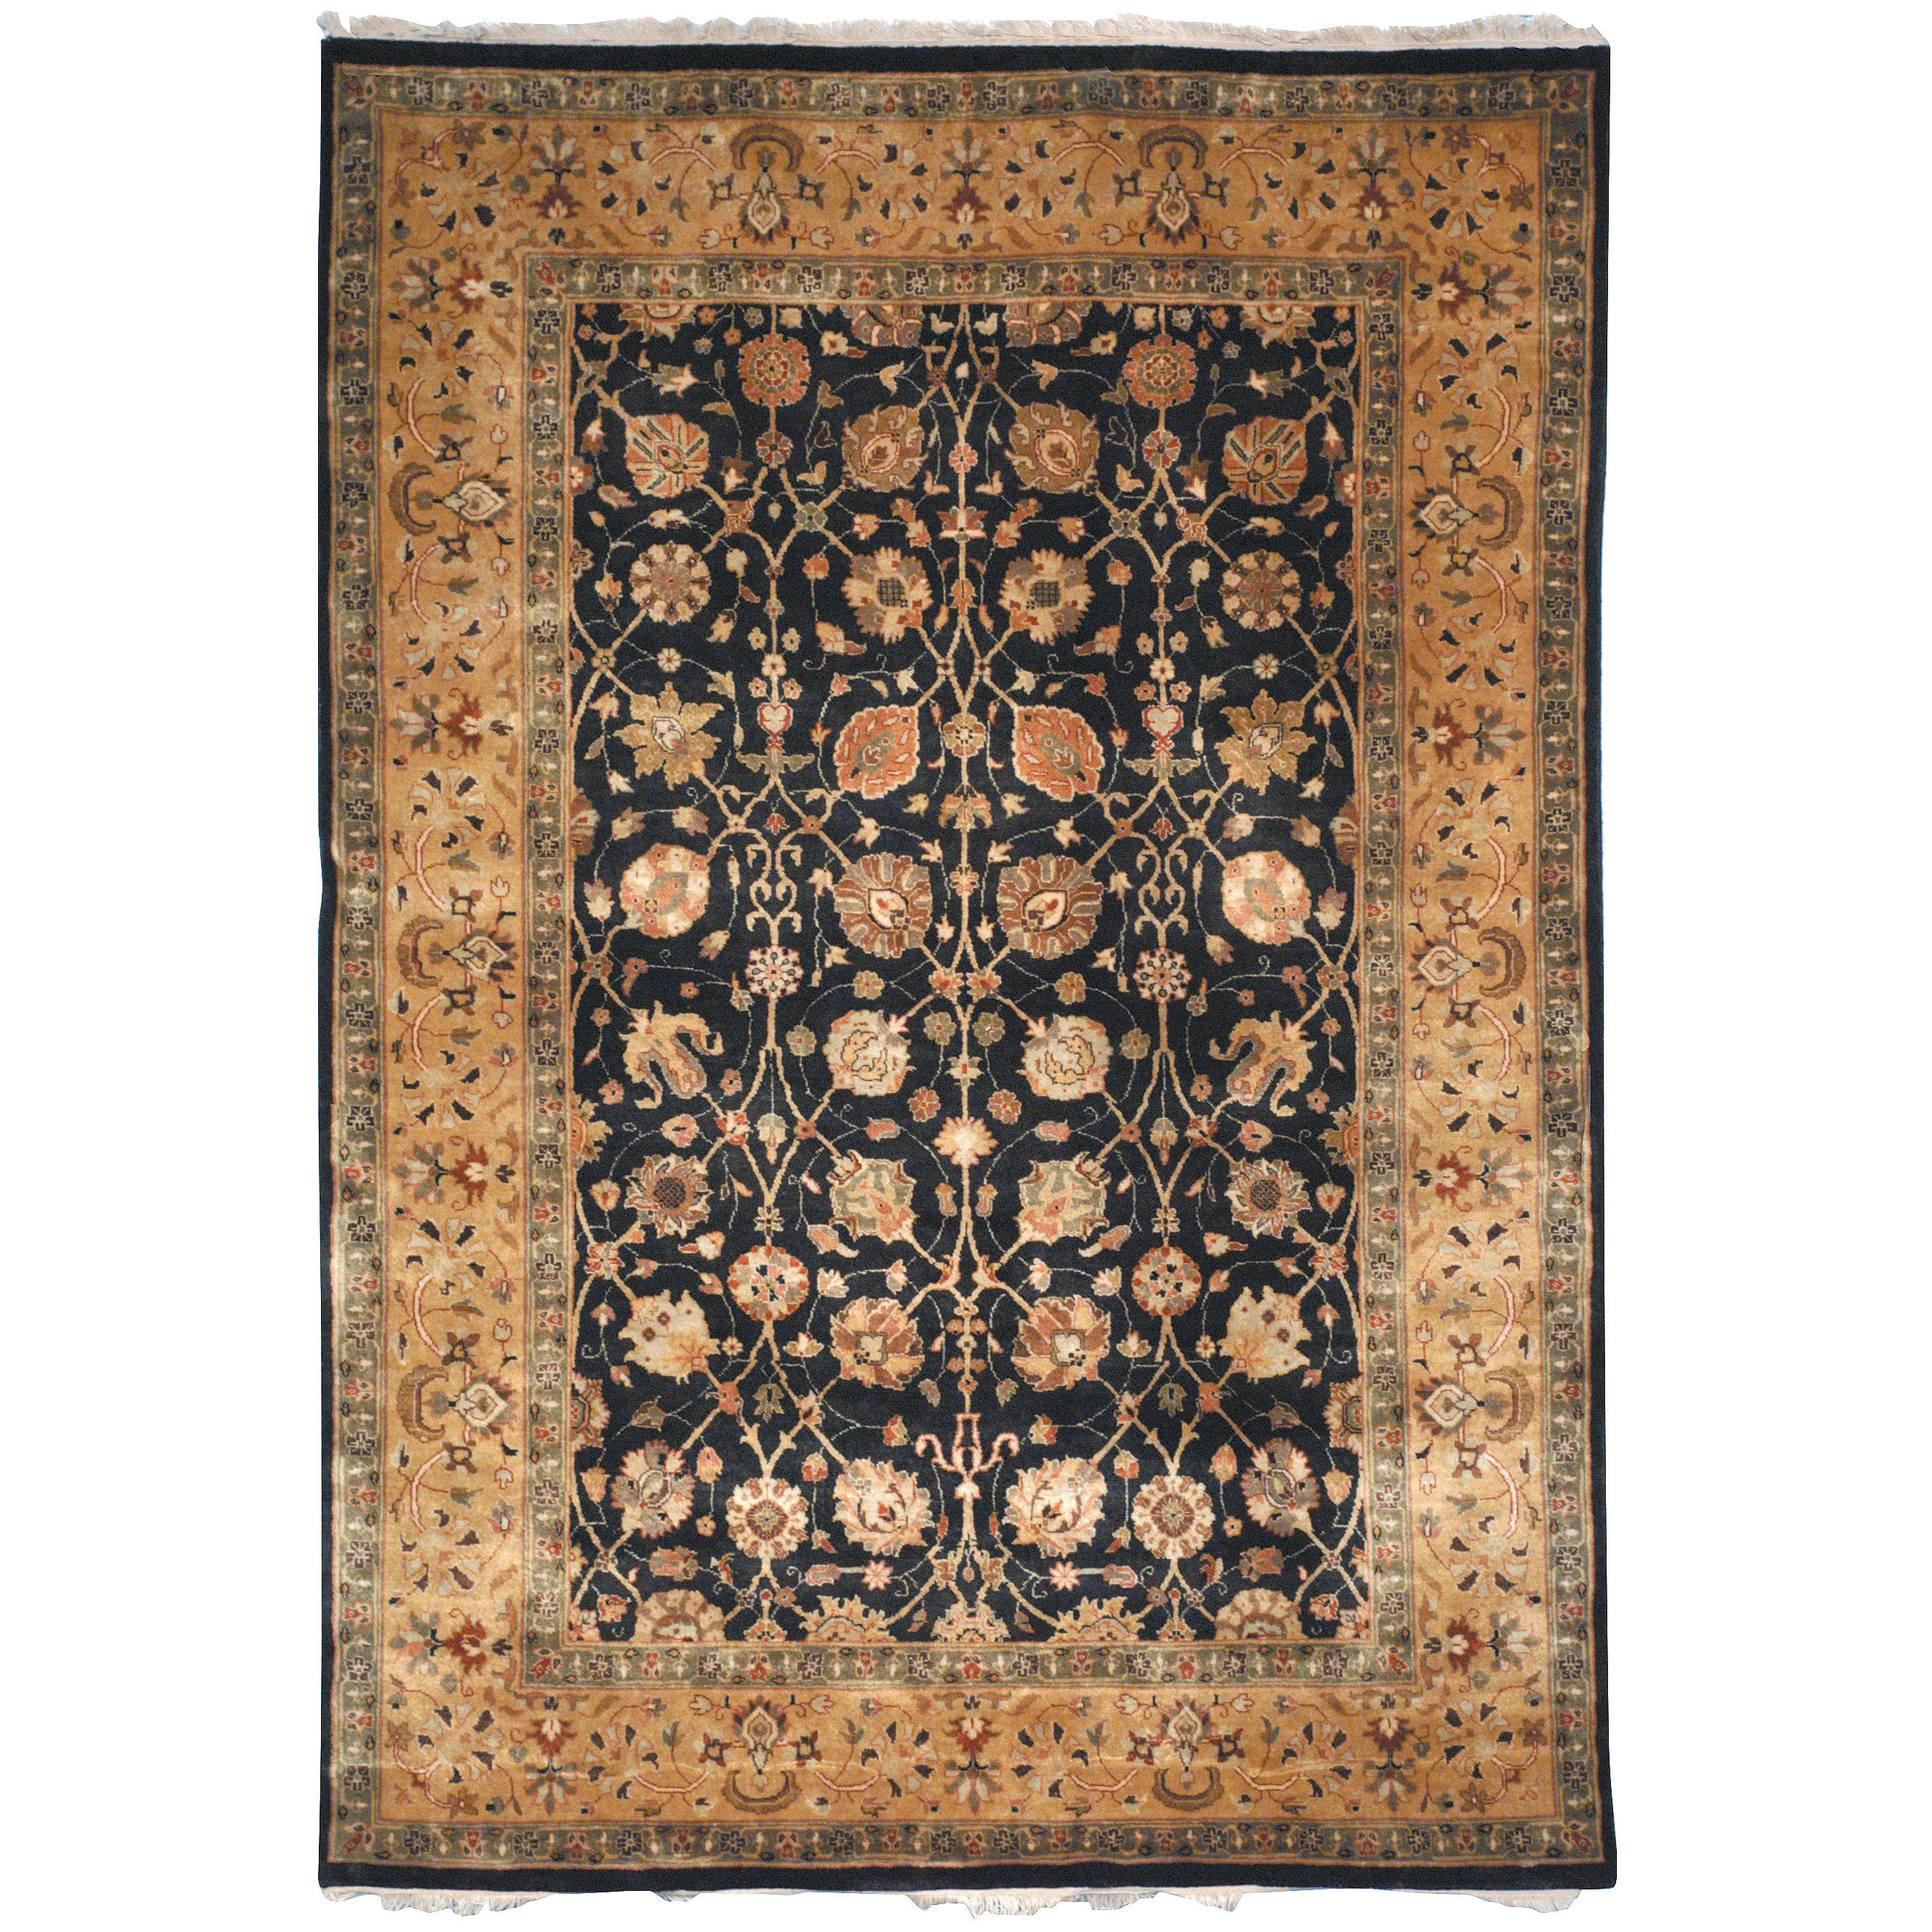 Safavieh Hand knotted Ganges River Black/ Gold Wool Rug (5 X 7)